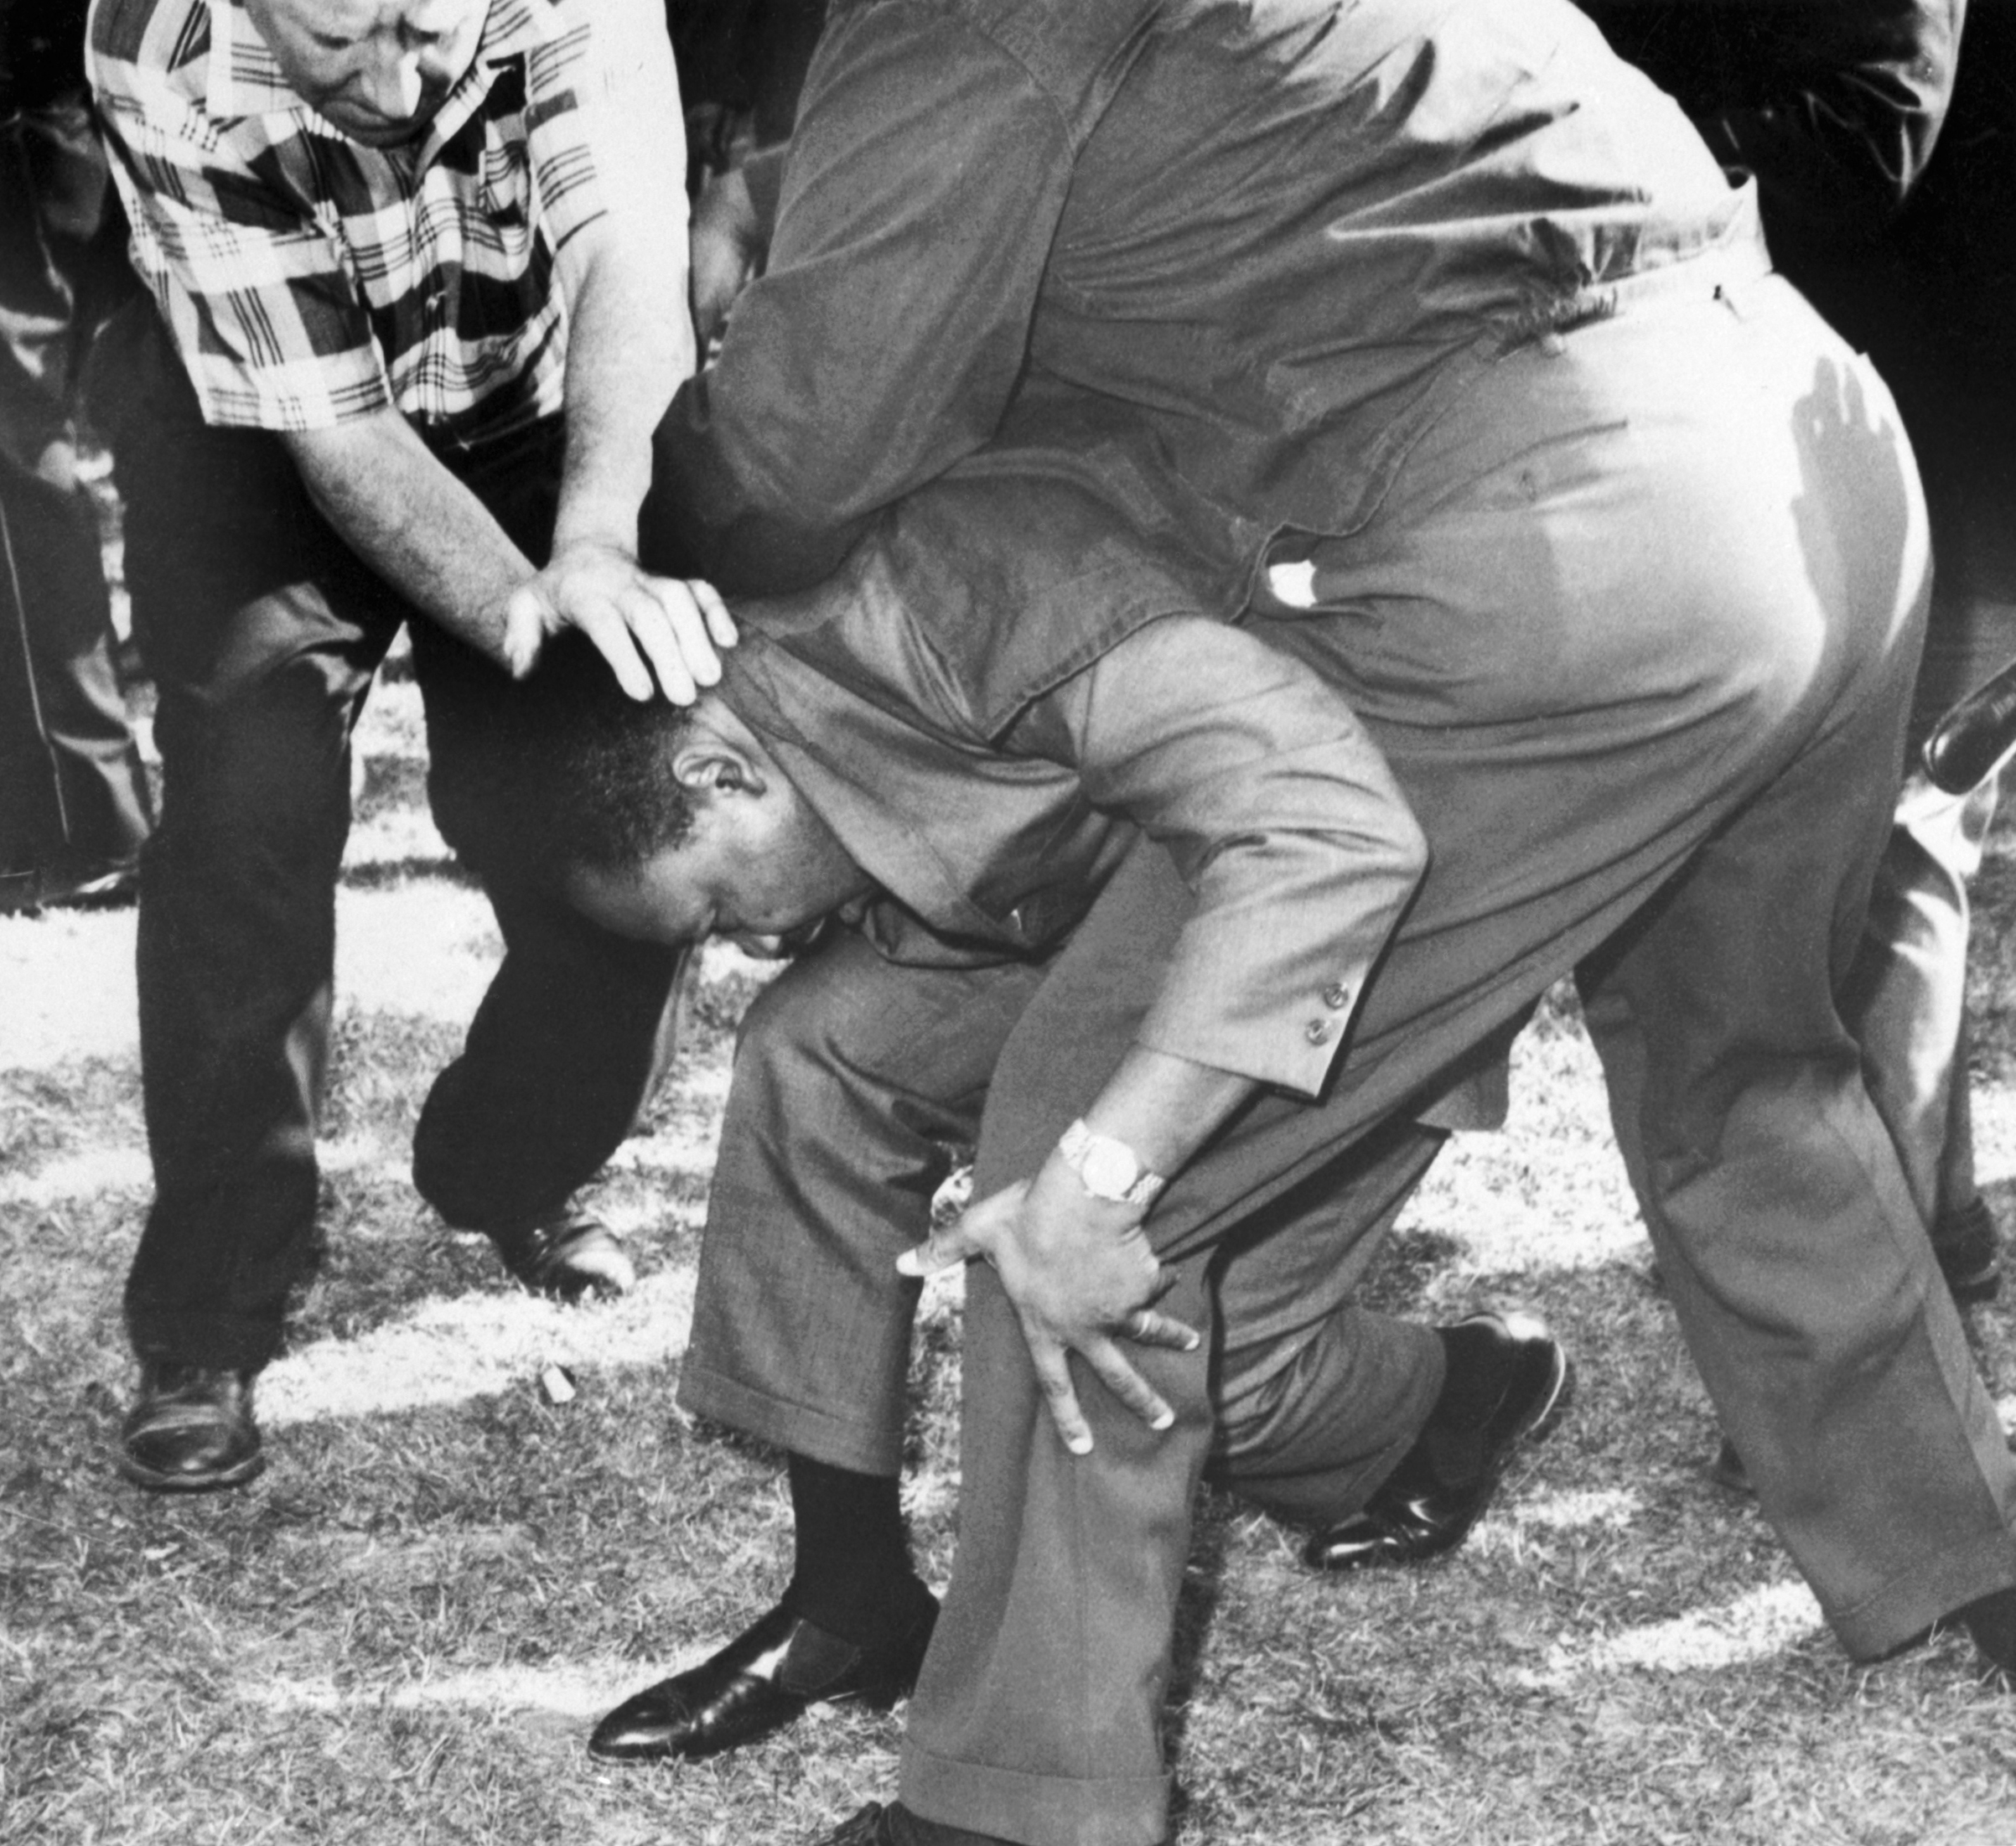 Struck on the head by a rock thrown by a group of hecklers, Dr. Martin Luther King falls to one knee. Dr. King regained his feet and led a group of marchers demonstrating alleged housing discrimination through an all-white district in Chicago, Aug. 5, 1966. (Bettmann / Getty Images)